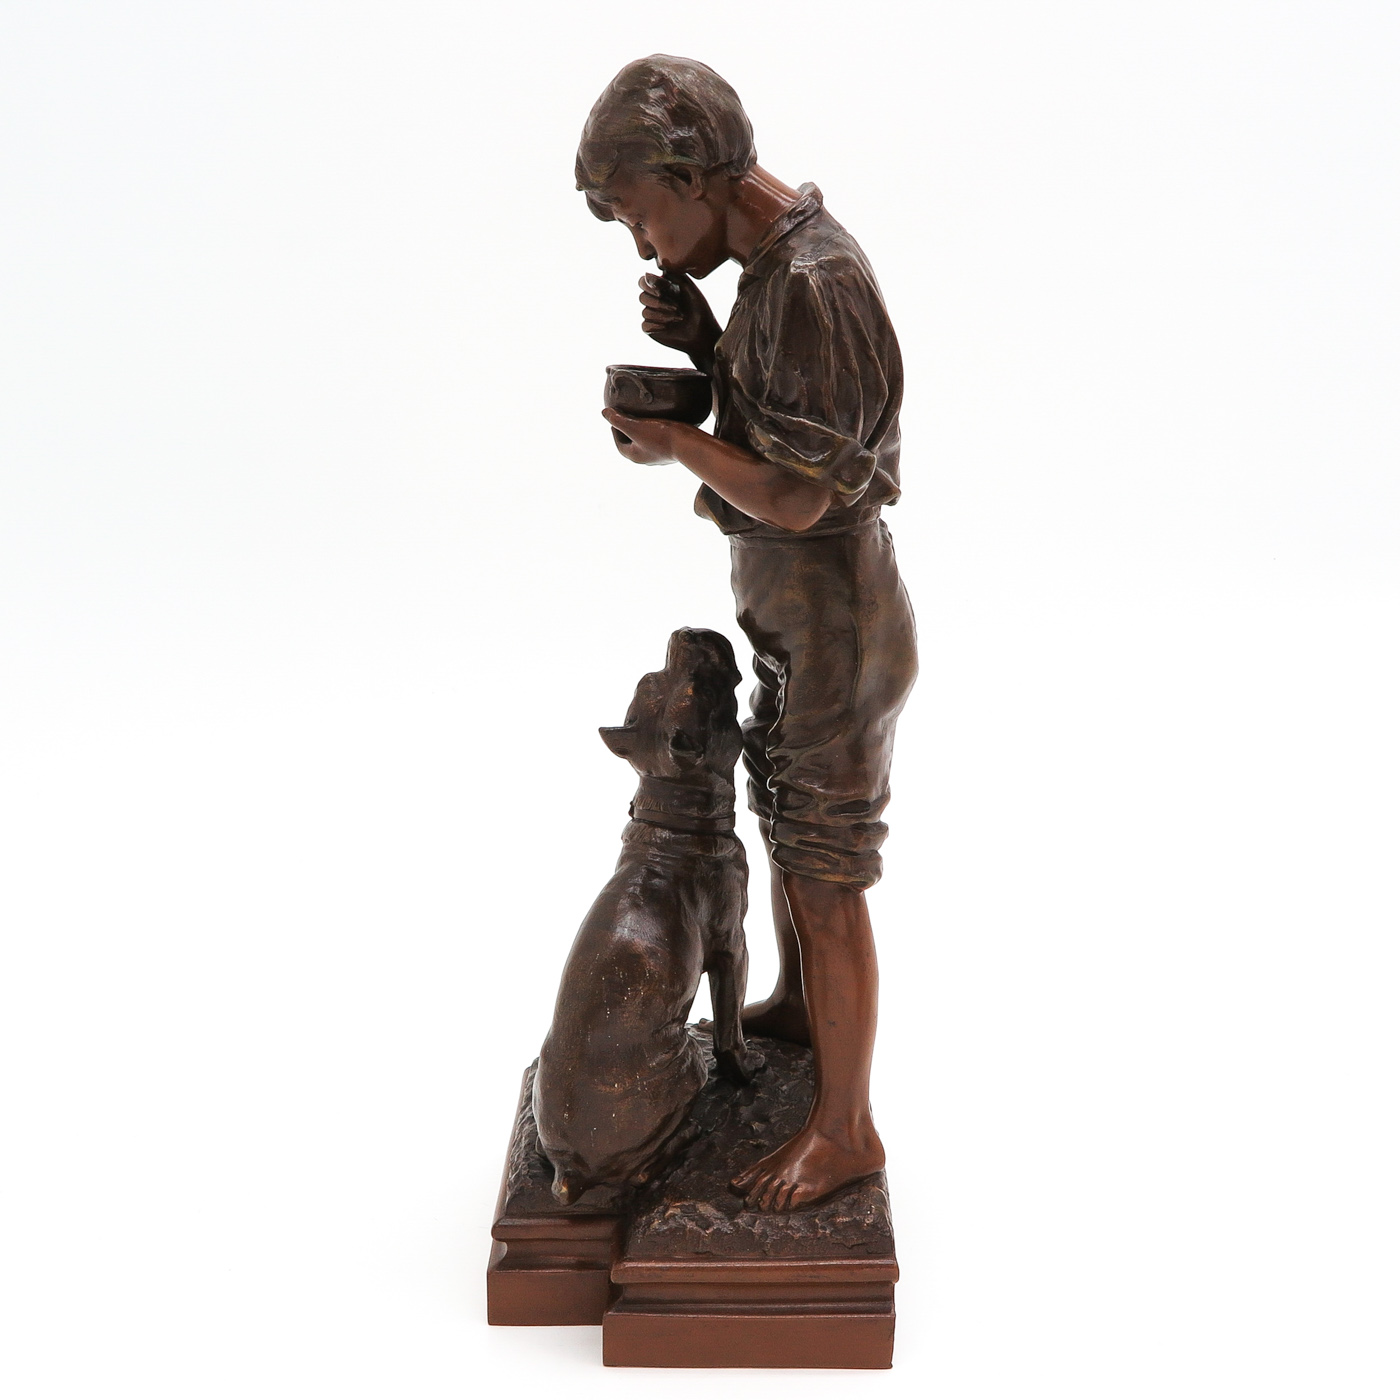 A Sculpture of Boy with Dog - Image 2 of 8